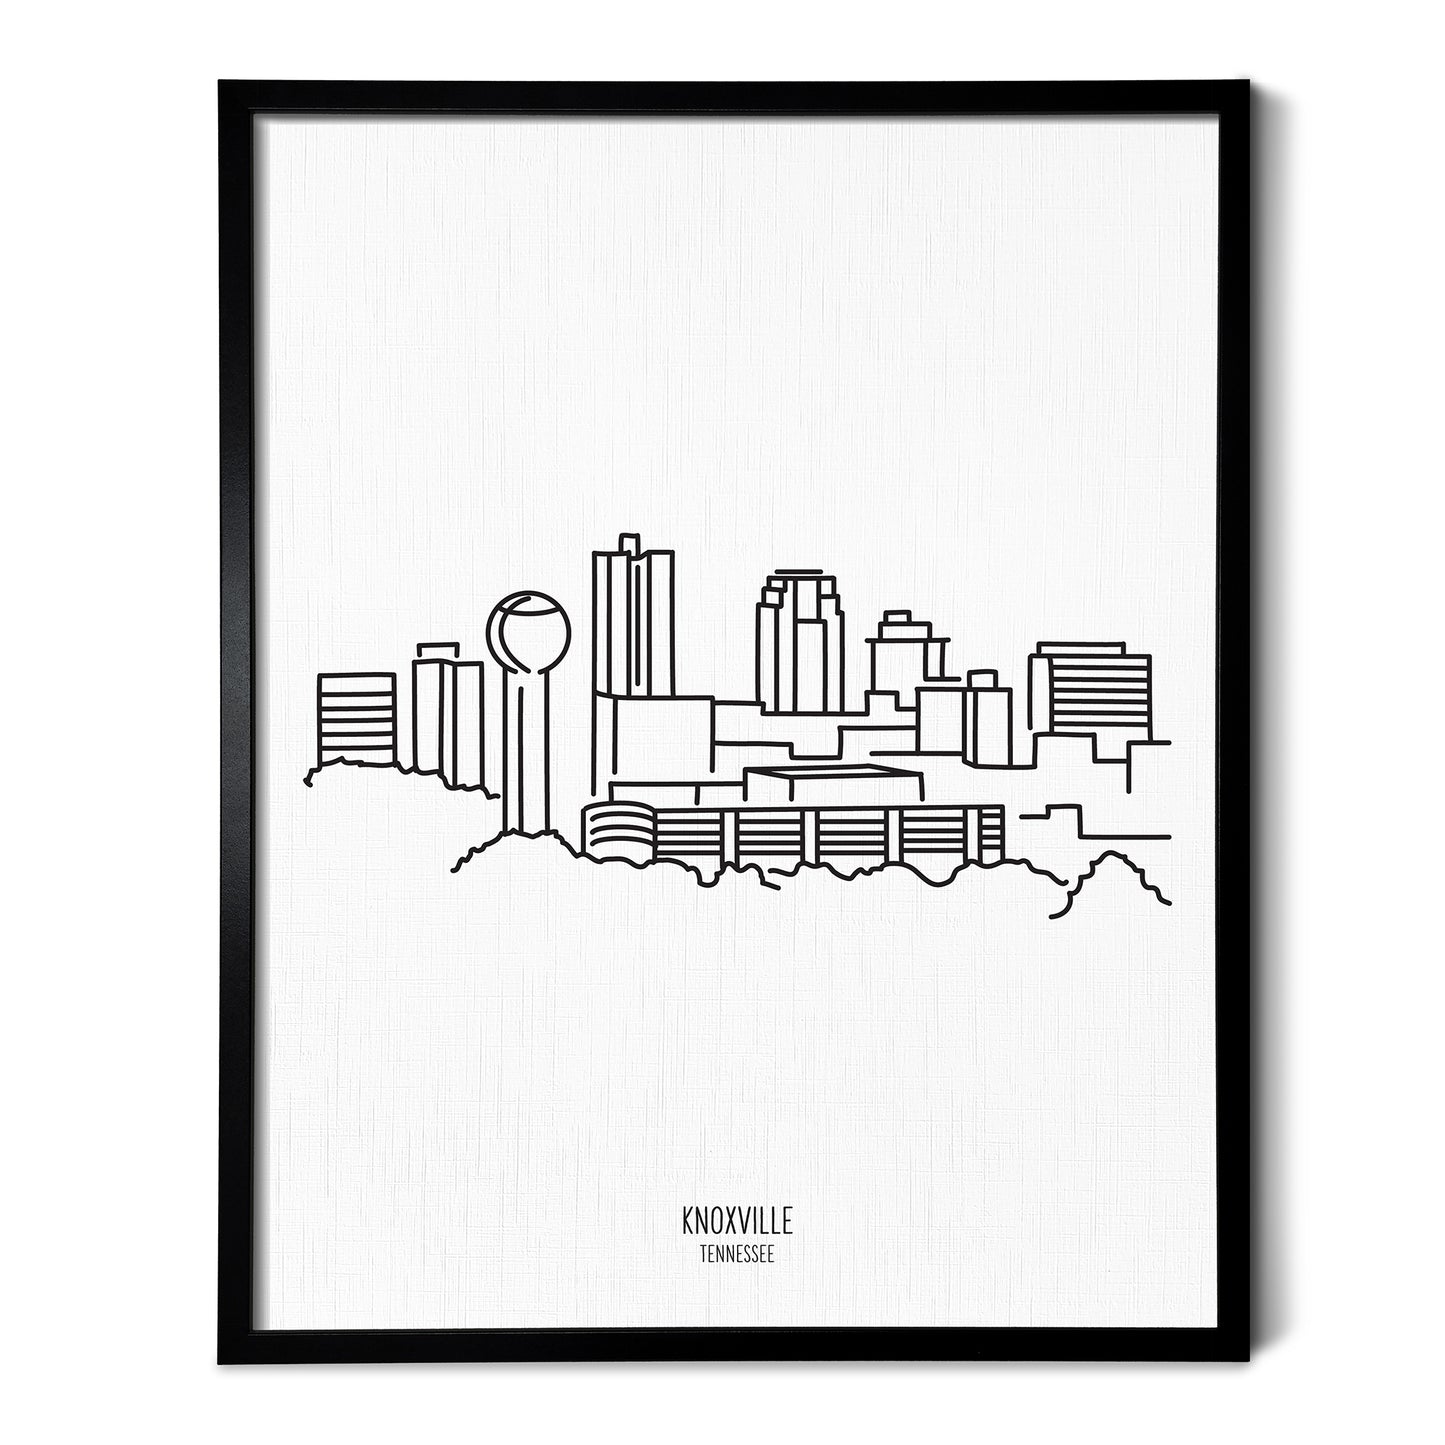 A line art drawing of the Knoxville Tennessee Skyline on white linen paper in a thin black picture frame